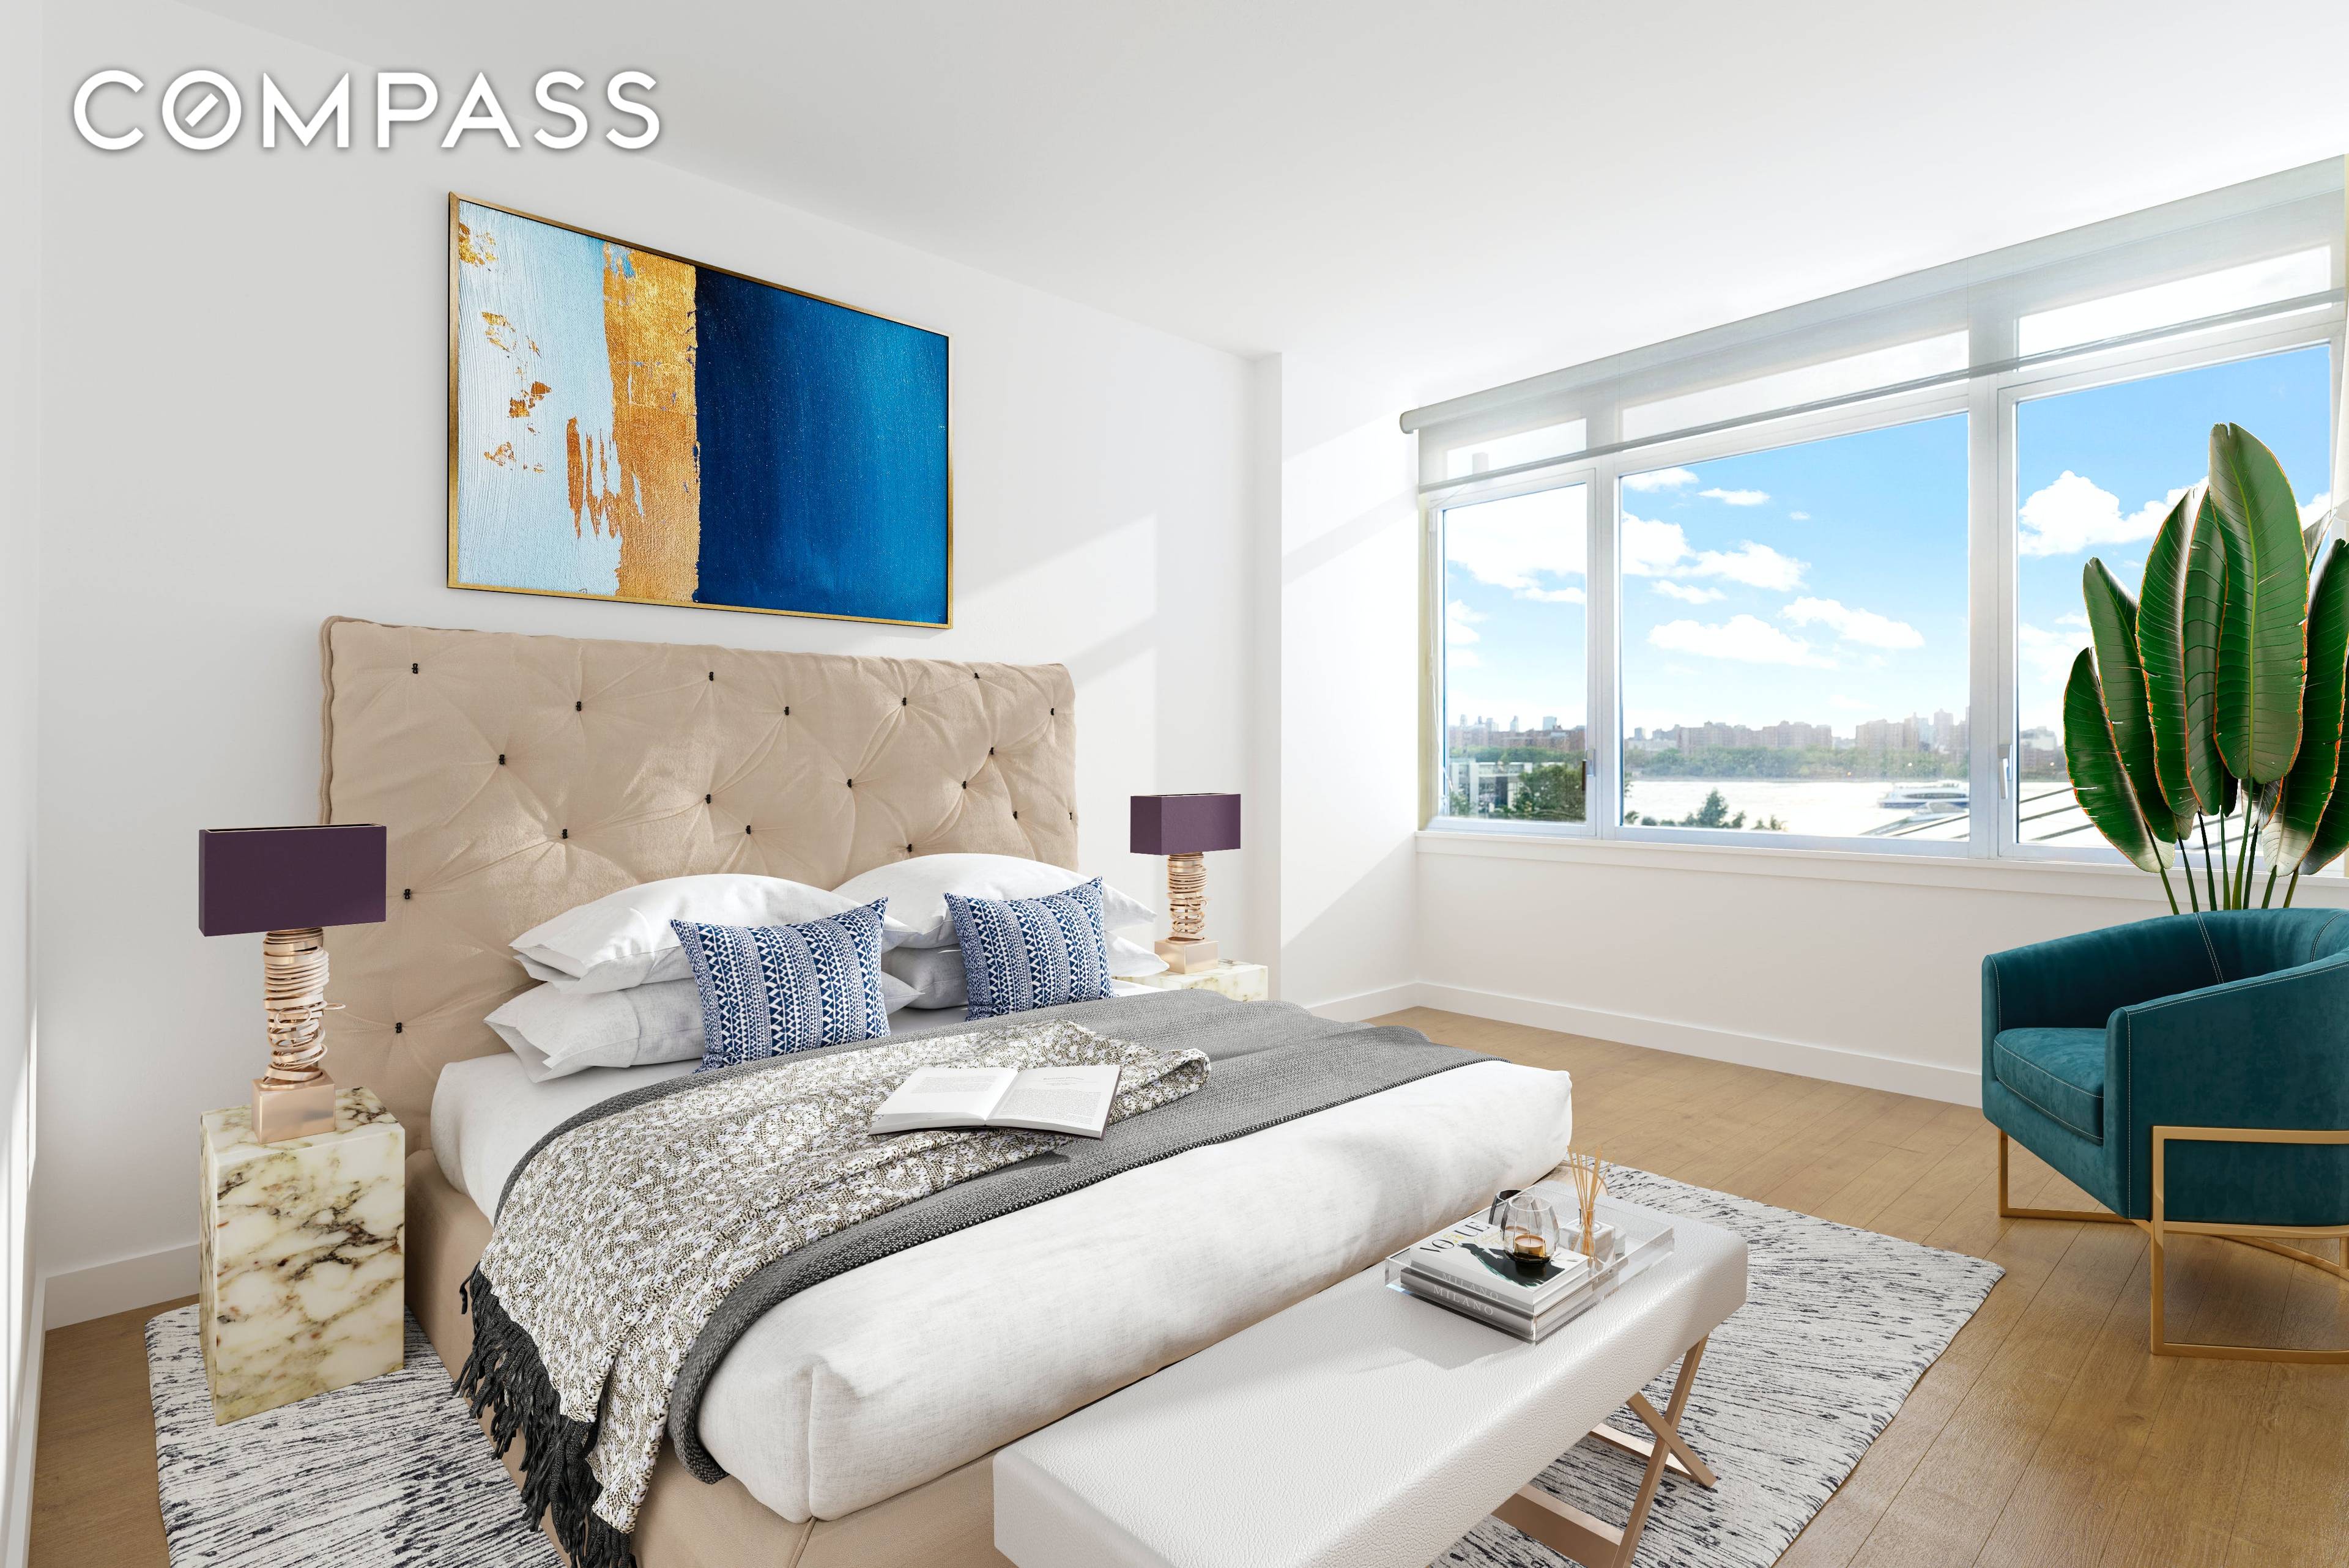 Williamsburg s Premier Condo The EDGE Large 2BD 2BA, with Direct and Protected Manhattan Skyline Views from Every Room, Open Chef's Kitchen with Stainless Steel Appliances, M W, D W, ...